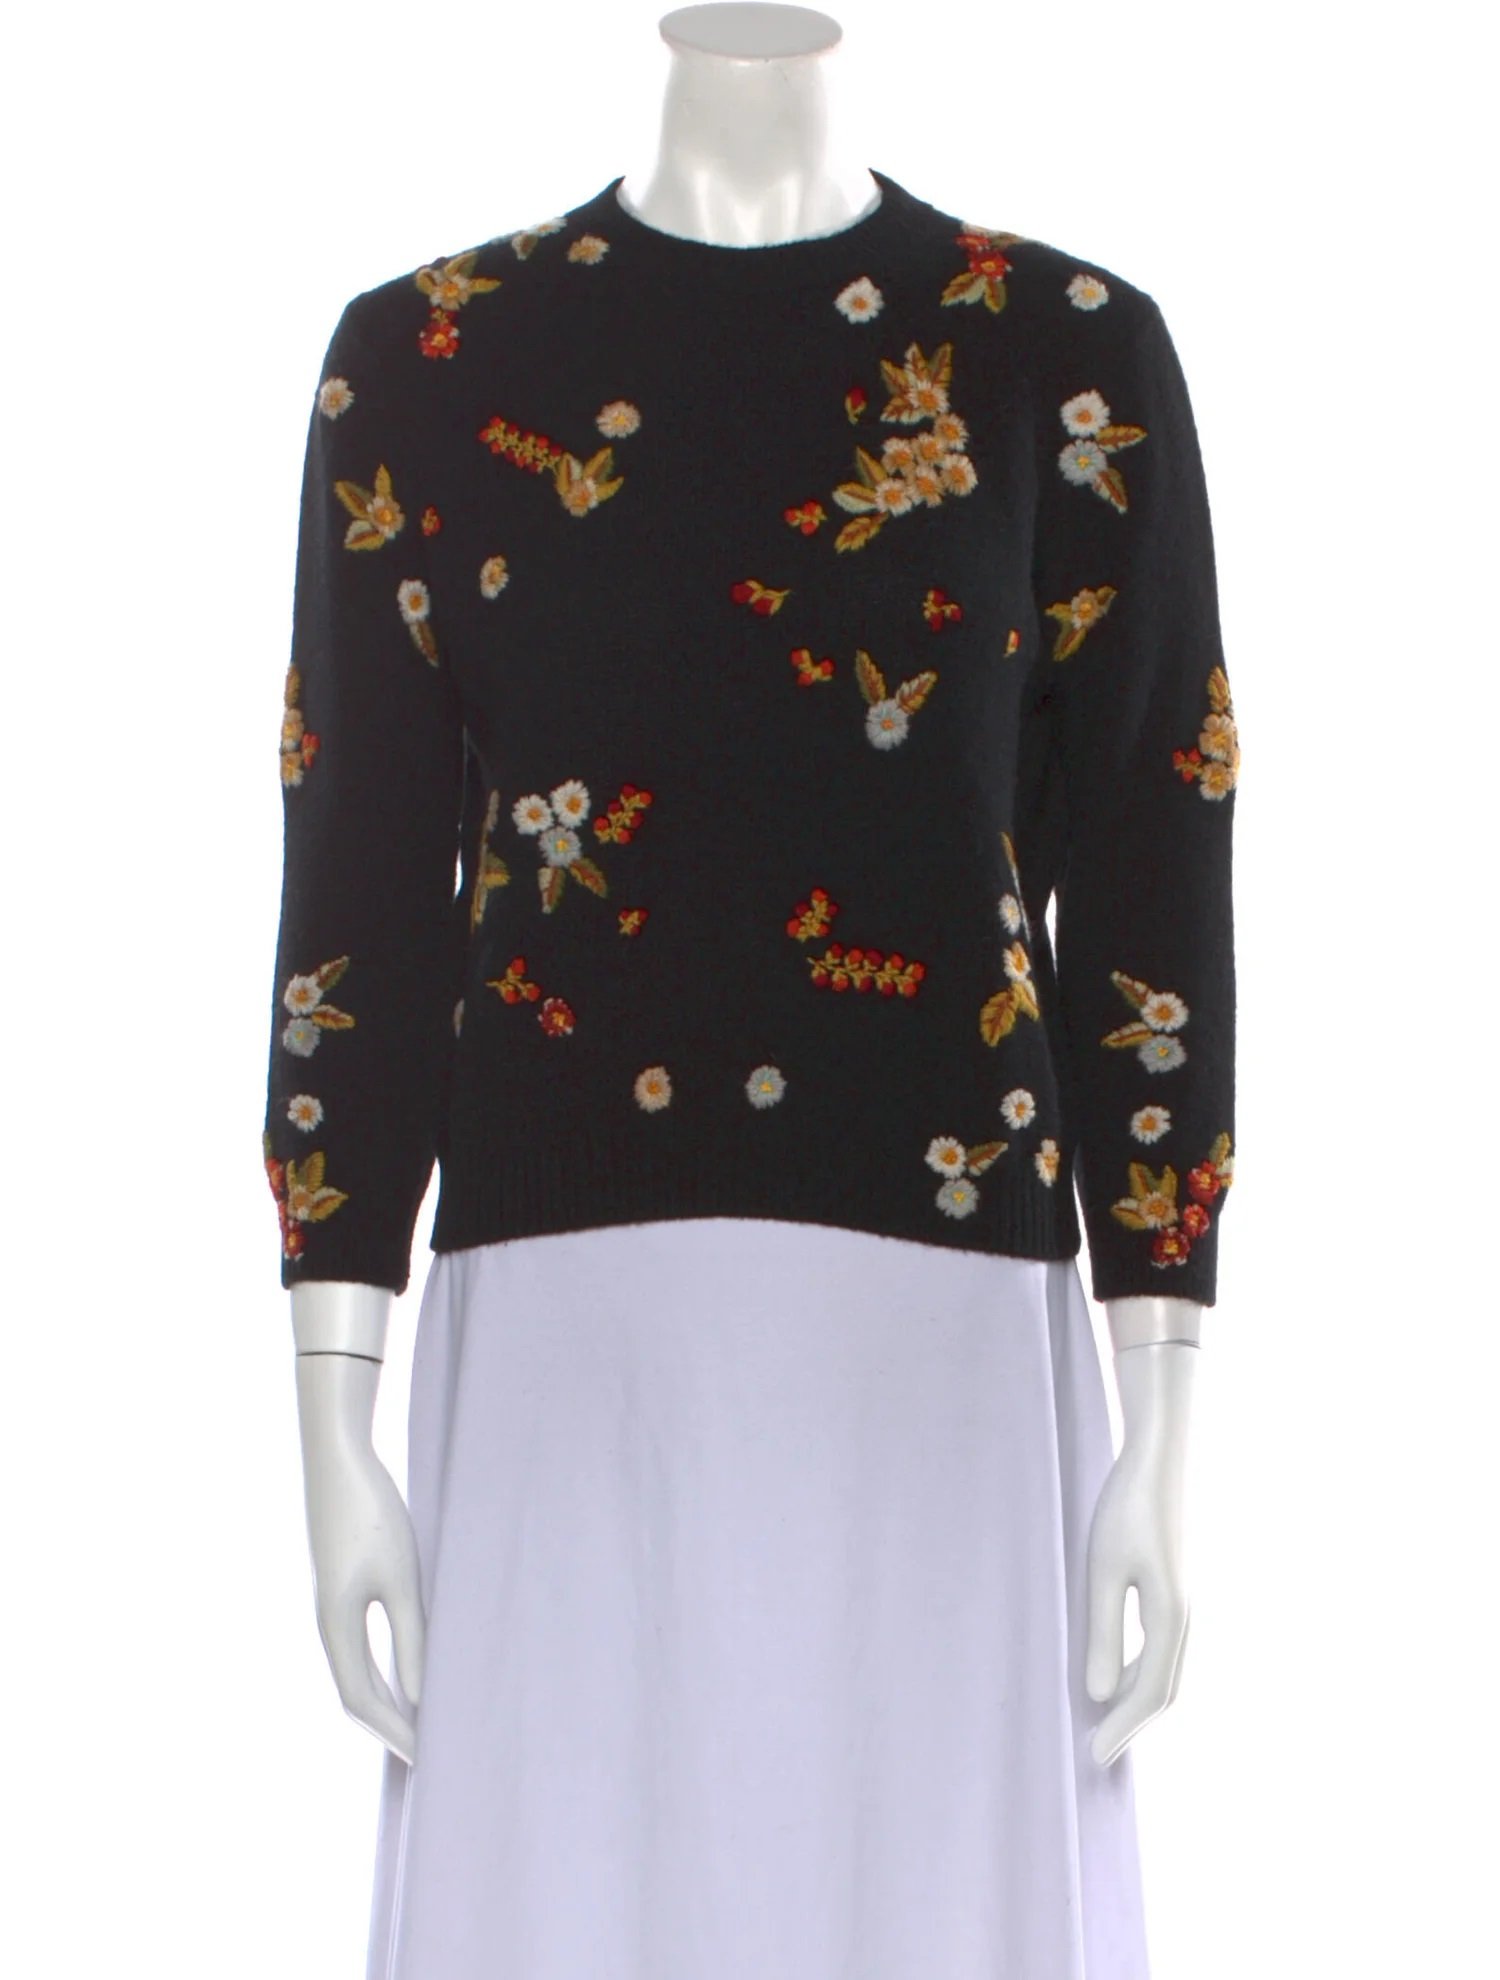 Christian Dior Floral-Embroidered Wool Sweater.jpg